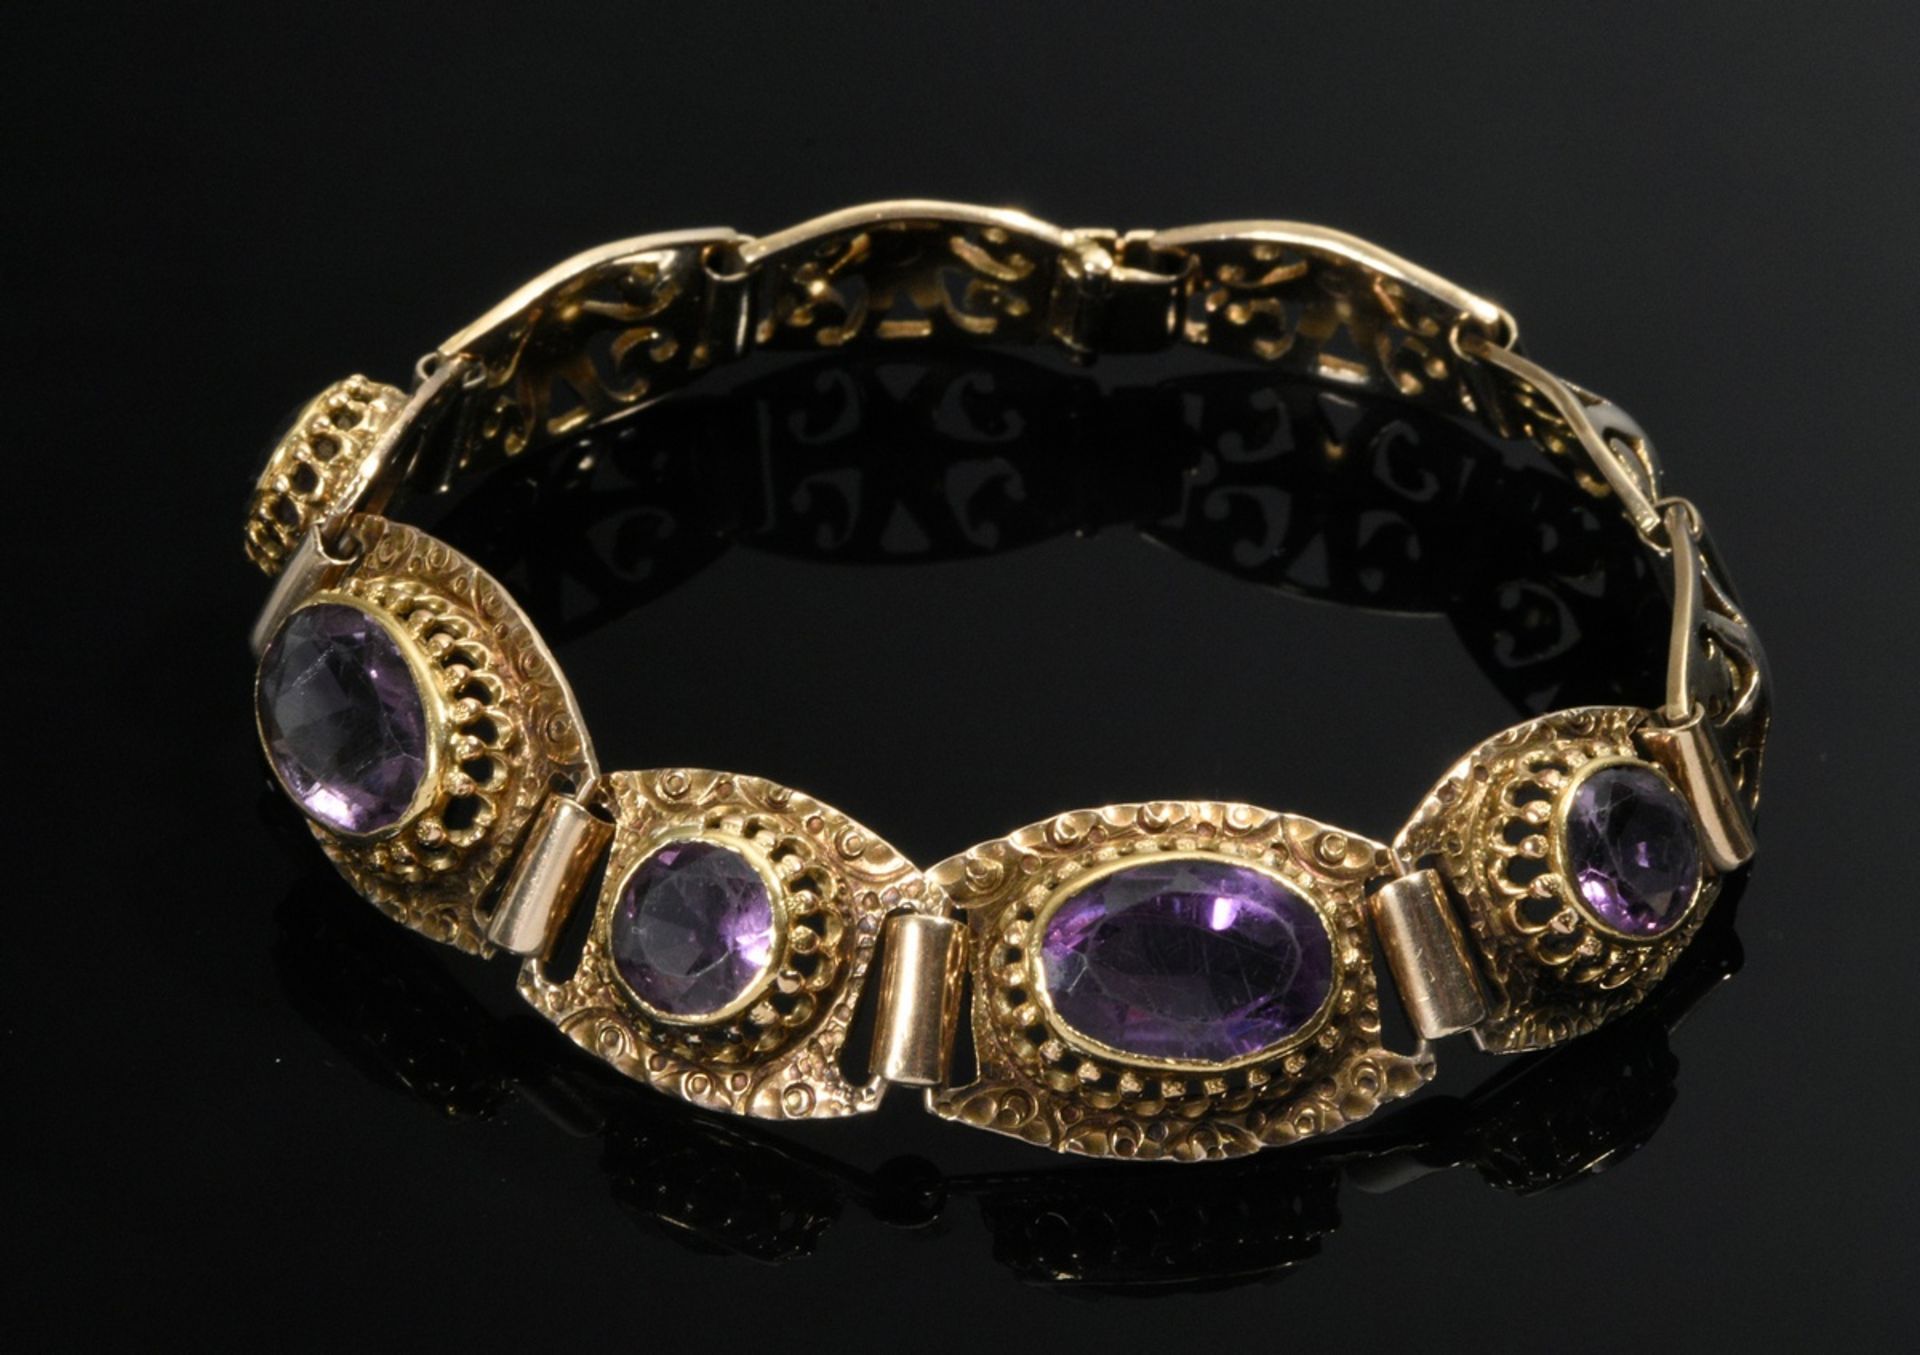 Midcentury yellow gold 585 bracelet with 5 oval amethysts on ornamentally cut elements, 20g, l. 17.